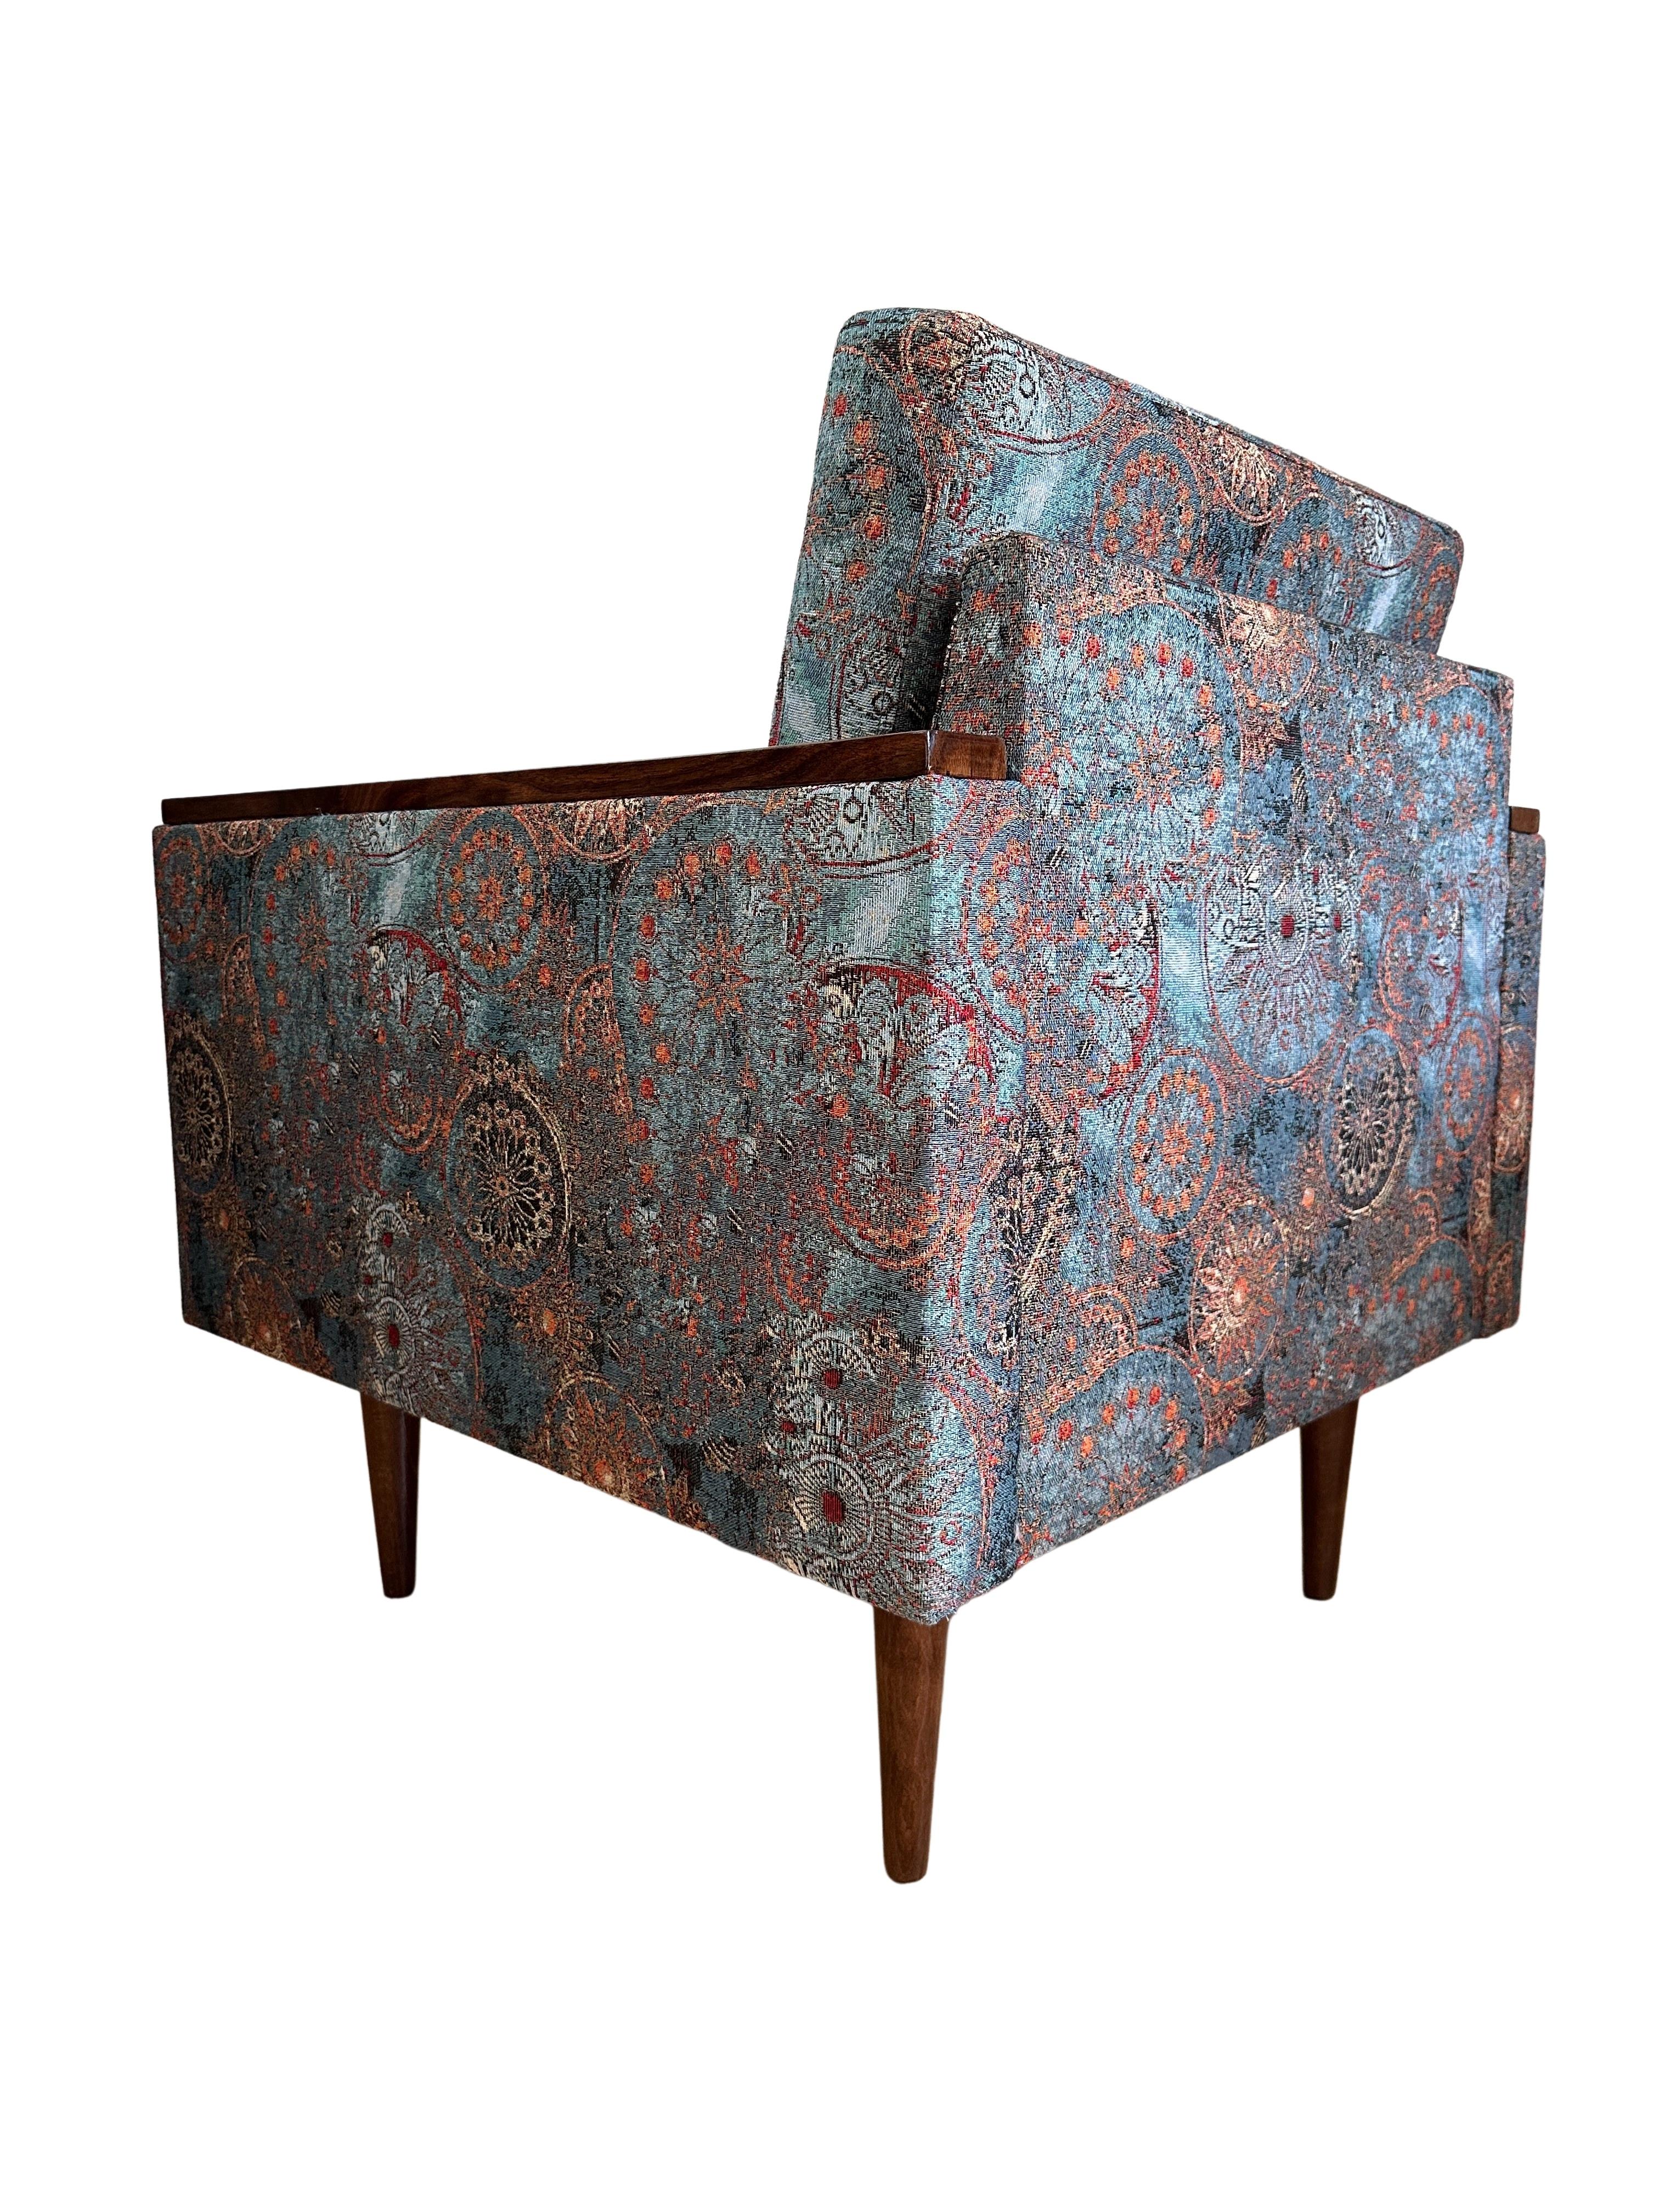 Fabric Midcentury Geometric Armchair with Ethnic Pattern, Europe, 1970s For Sale